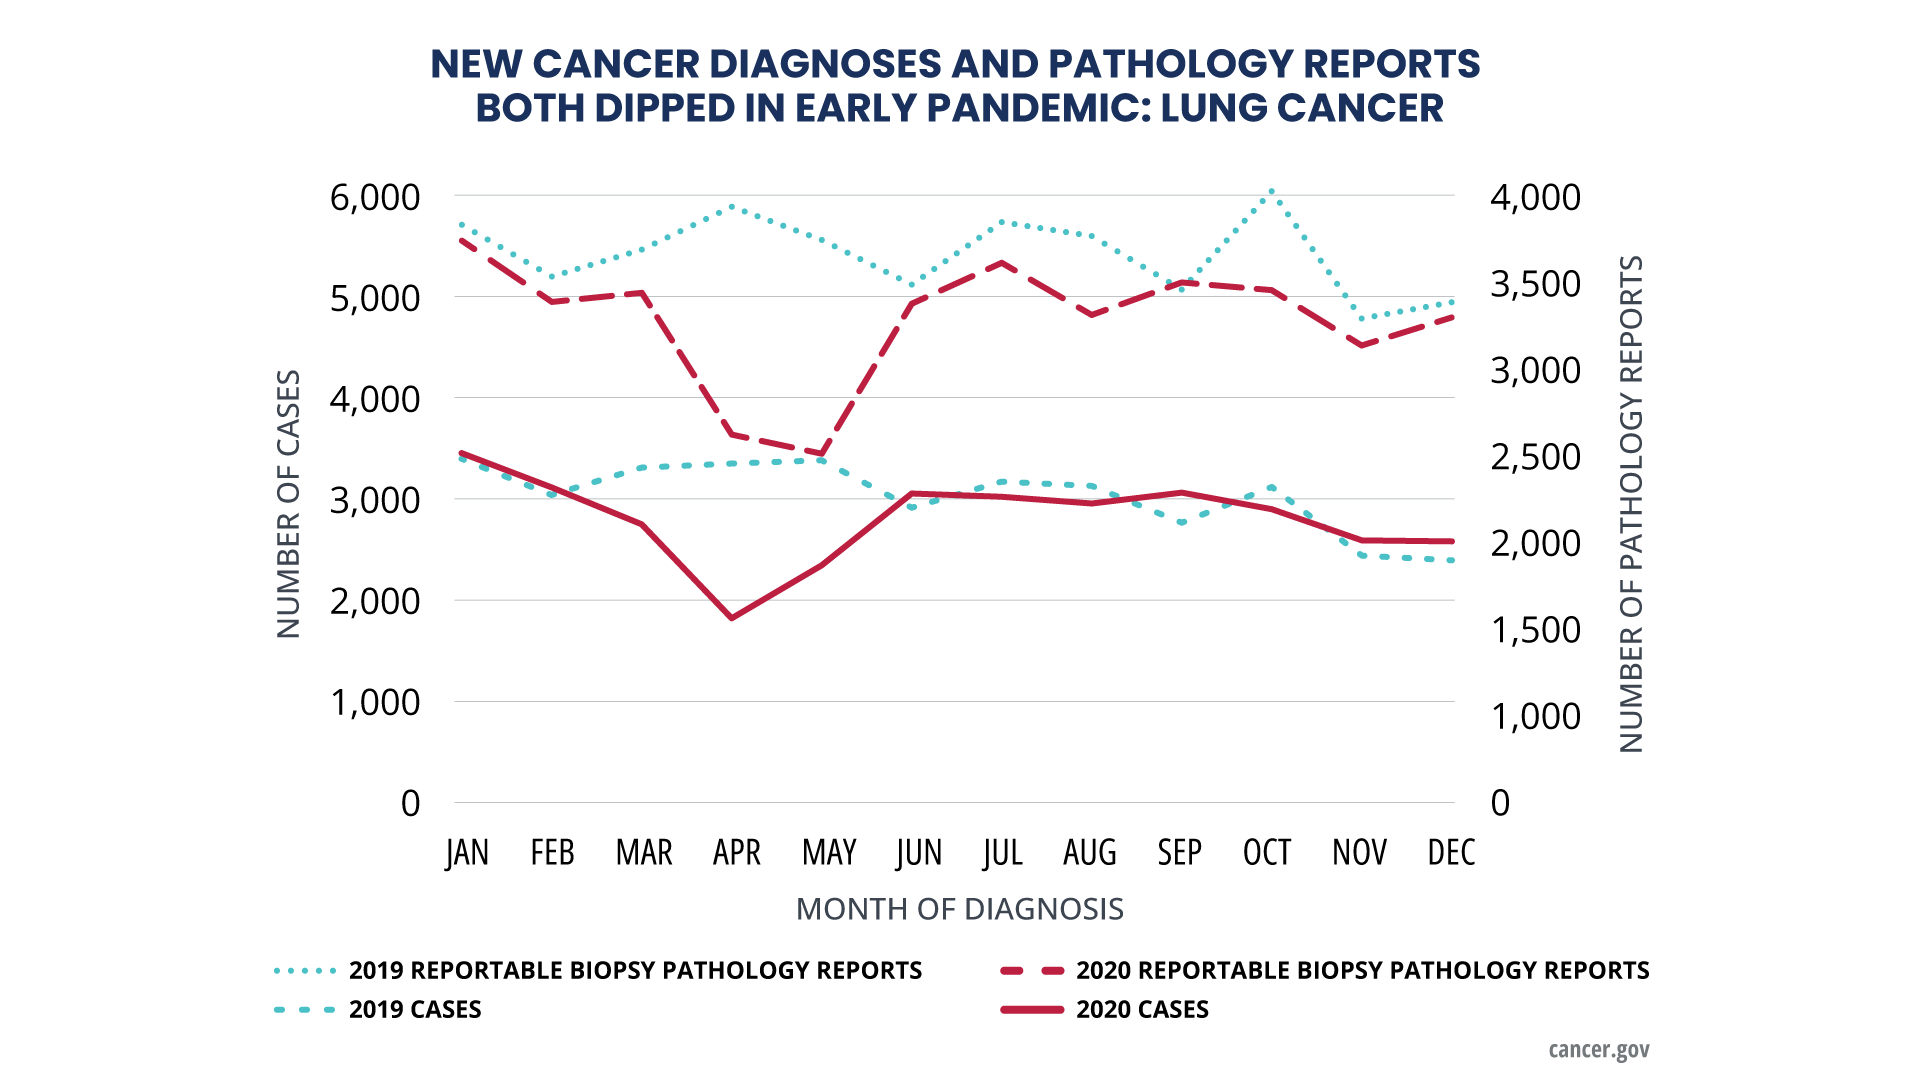 Annual Report to the Nation Part 2 pandemic cancer diagnoses - NCI